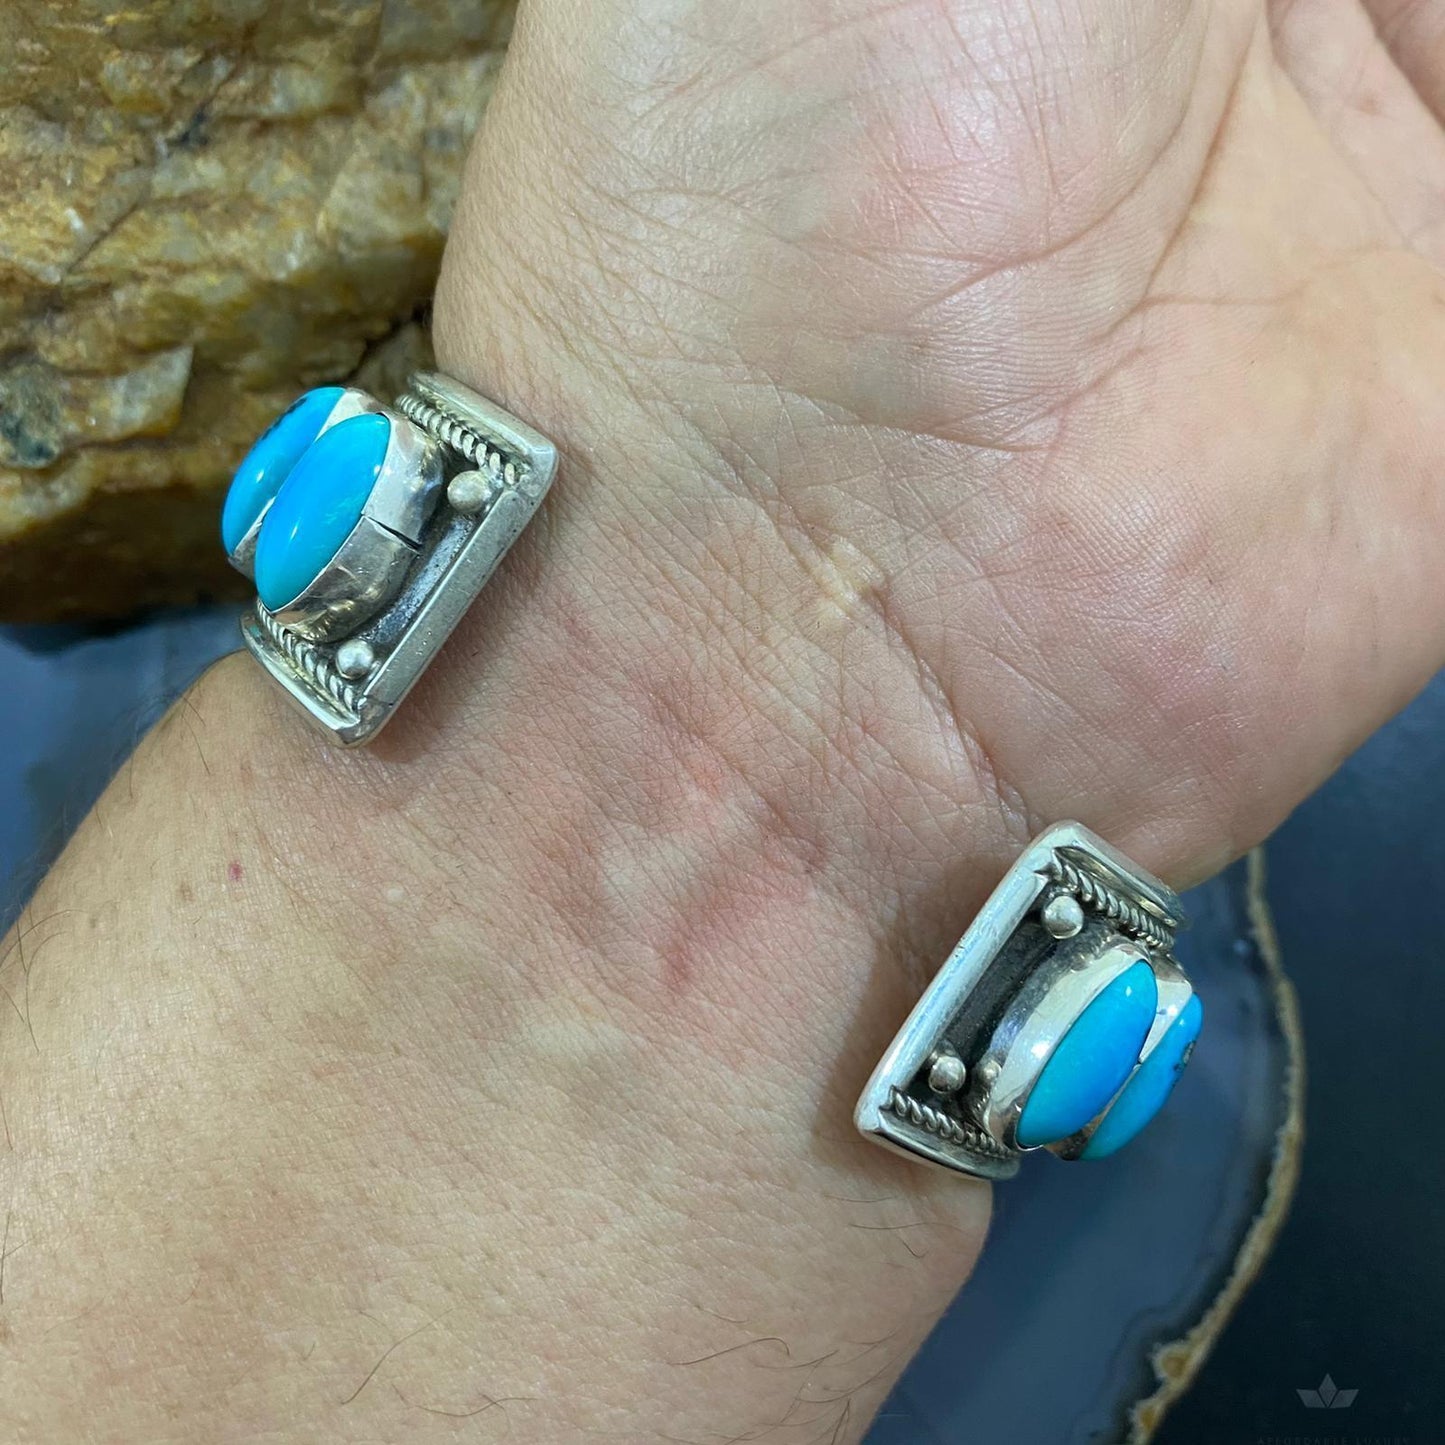 Vintage Native American Sterling Silver Oval Turquoise Row Bracelet For Men